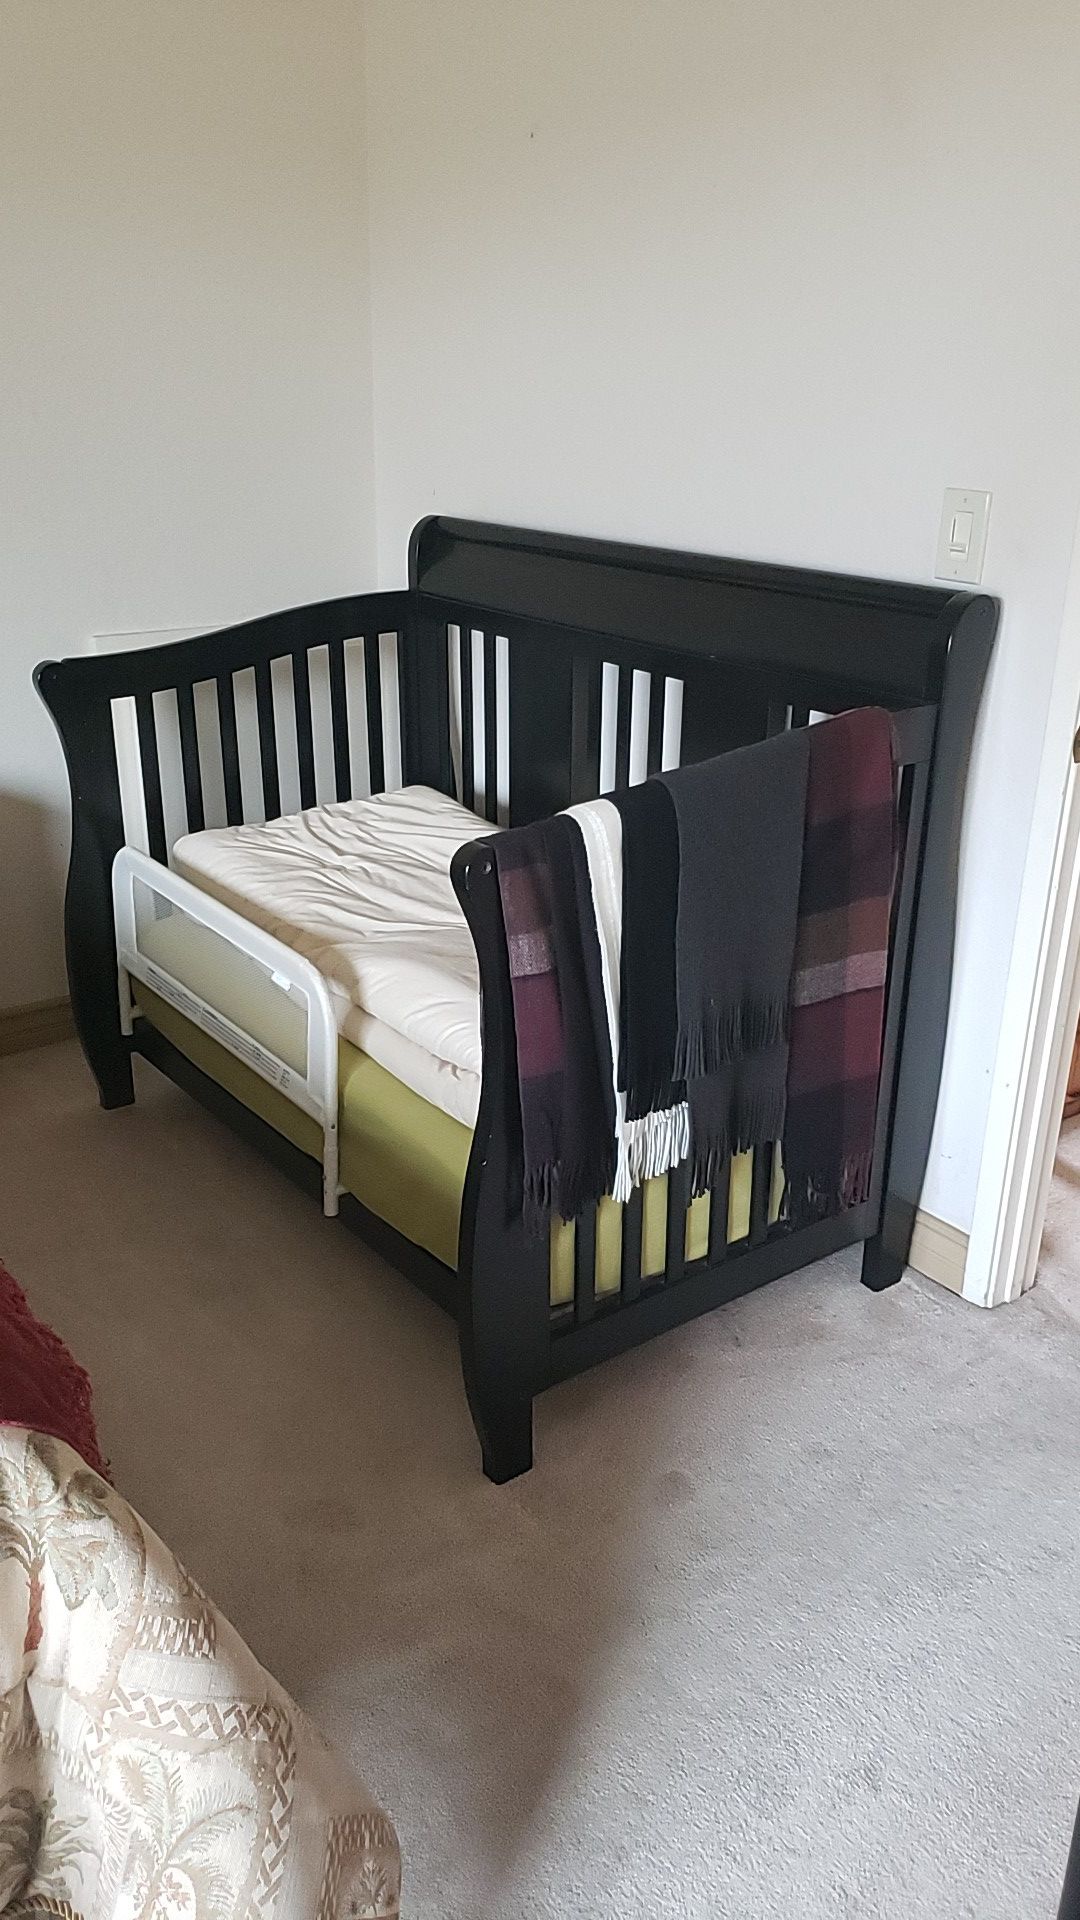 Baby crib and changing table for sale in perfect condition